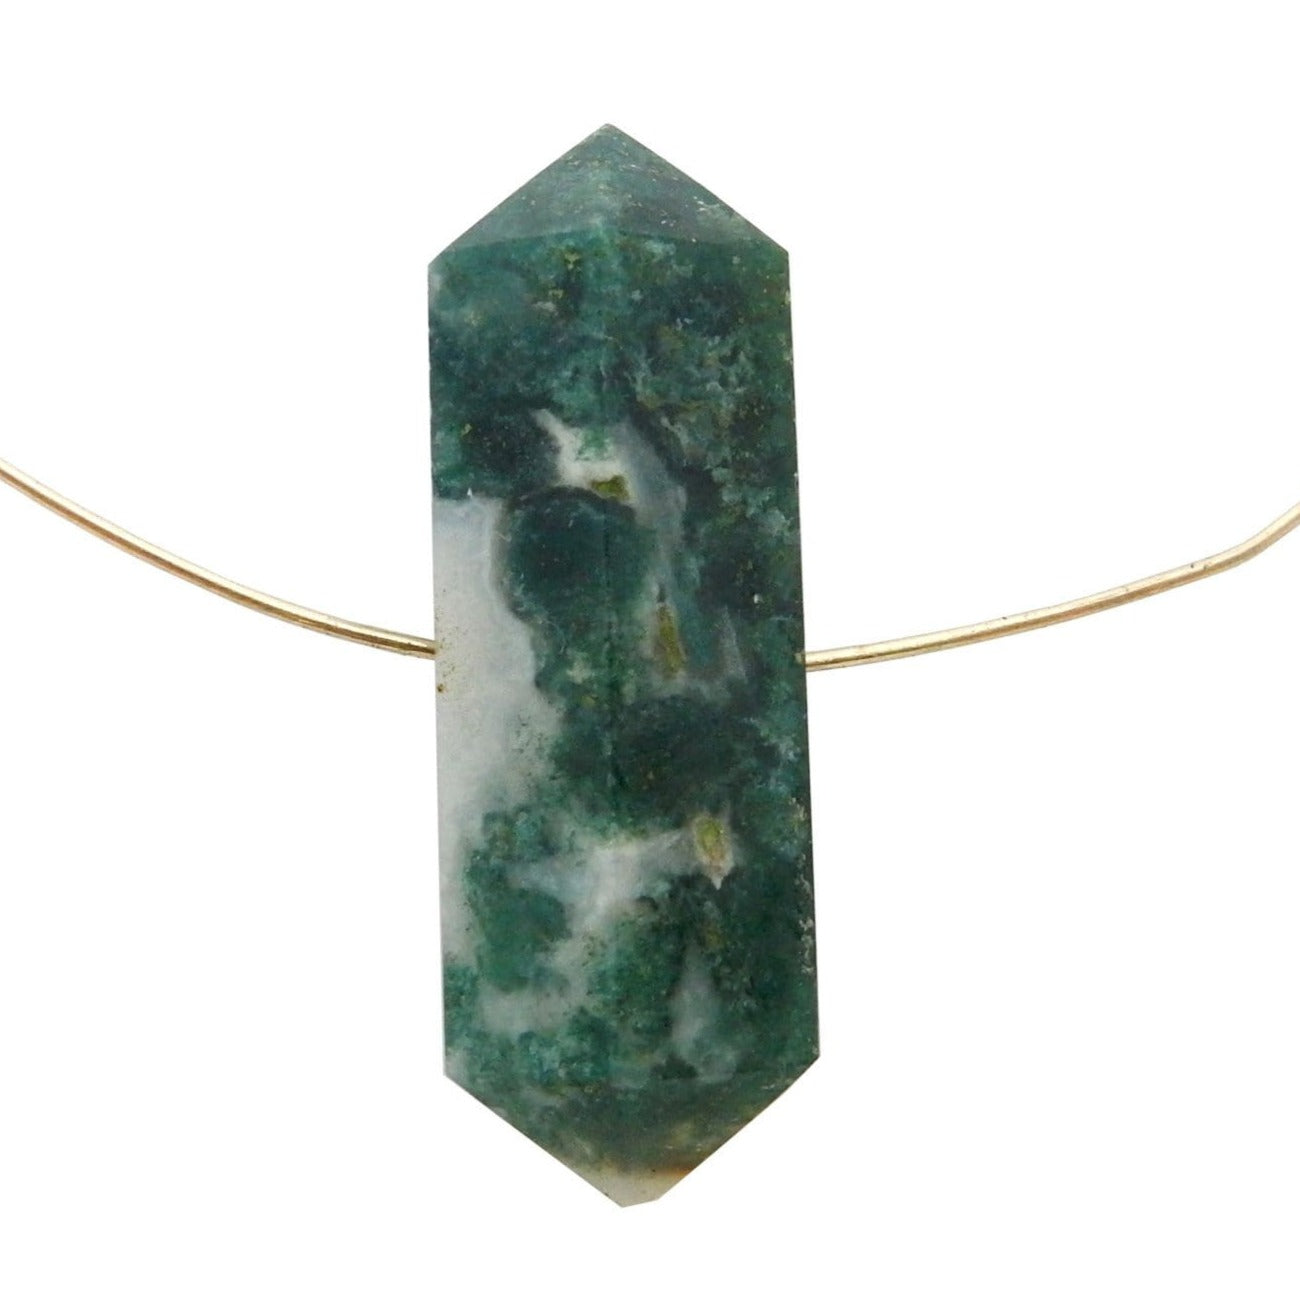 Petite Moss Agate Double Terminated Pencil Point in Beautiful shades of green mixed with white with string though the drilled hole (string not included)